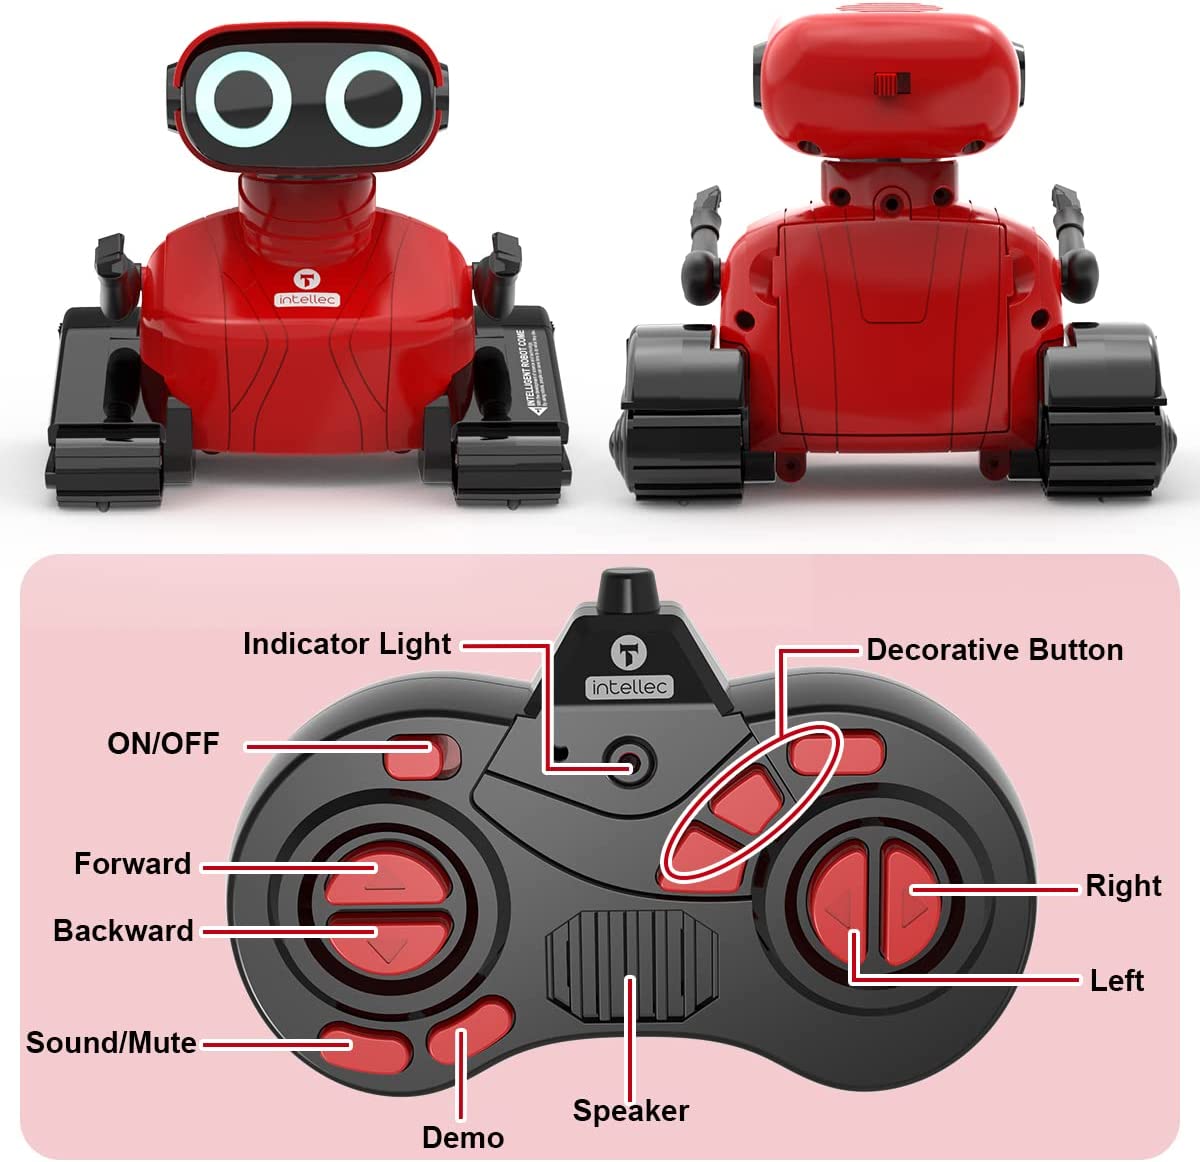 GILOBABY Remote Control Robot Toys, 2.4GHz RC Robots for Kids with Flexible Head & Arms, Dance Moves, Music and LED Eyes, Birthday Gifts for Children Boys Girls Age 4-7